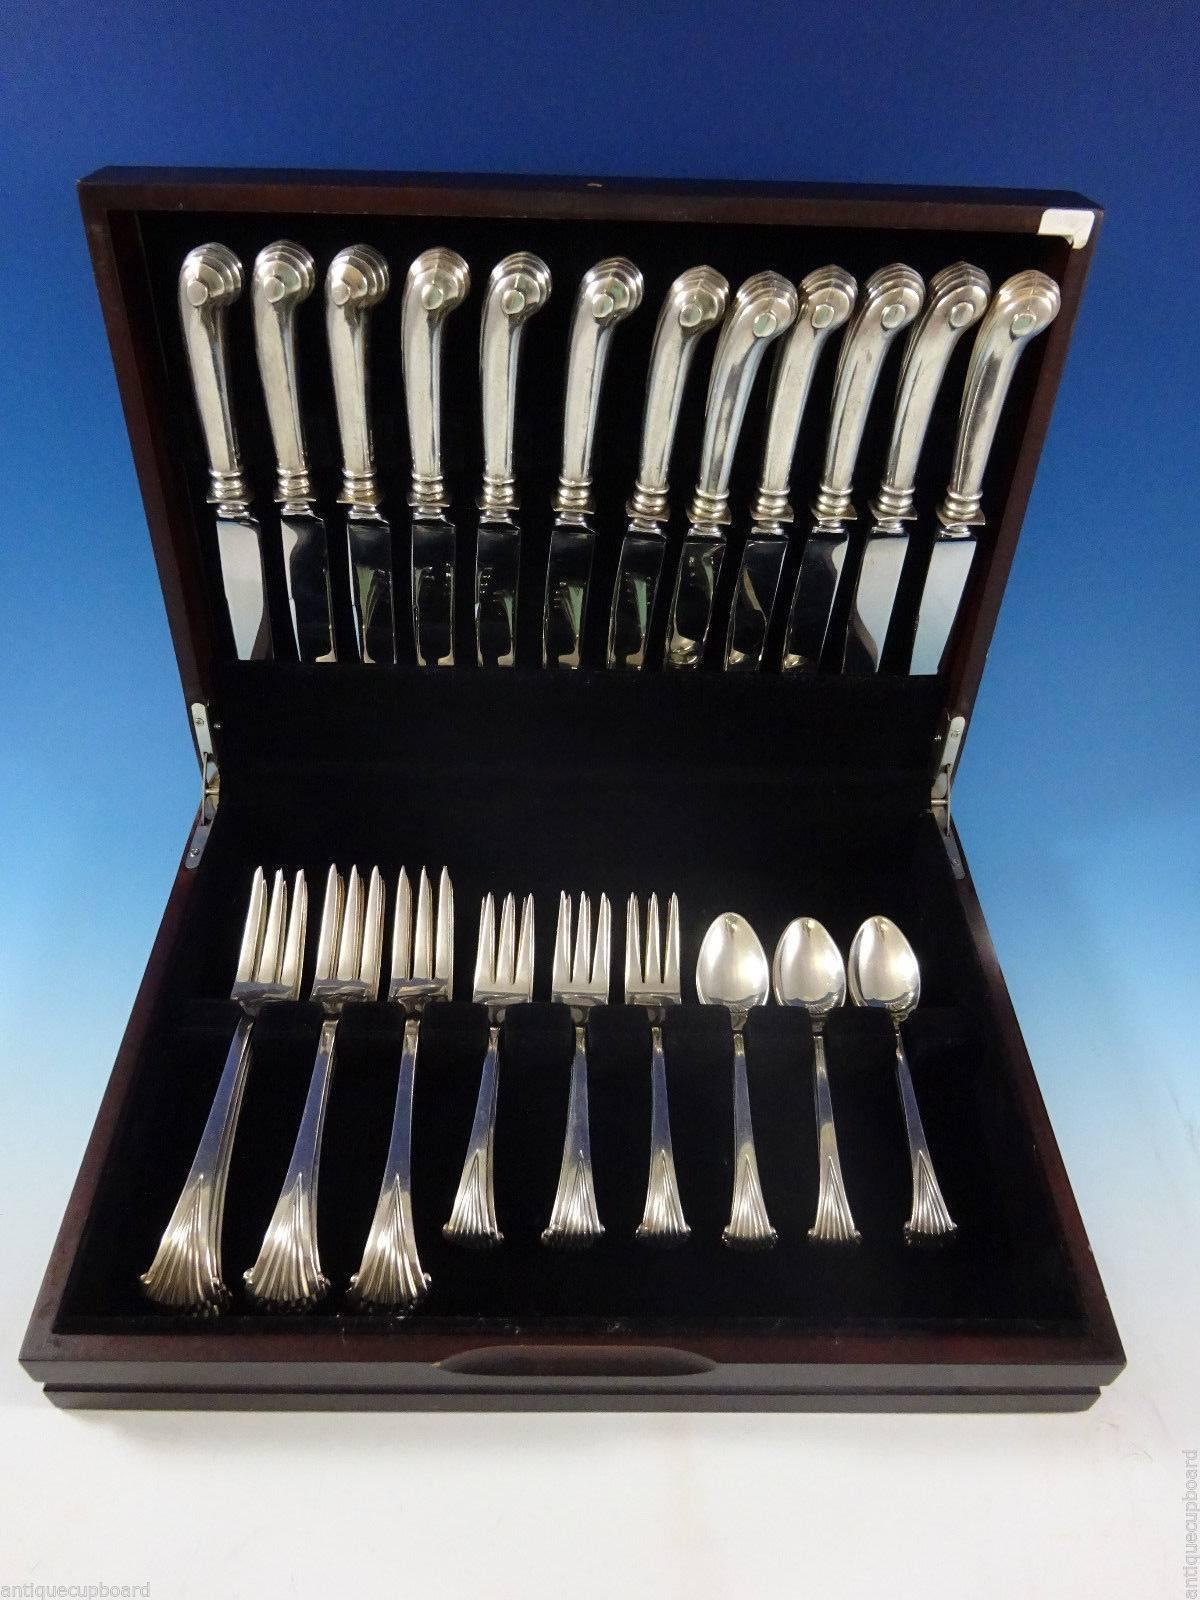 Onslow by Tuttle sterling silver dinner size flatware set, 48 pieces. This pattern is heavy with wonderful pistol-grip handles on the knives. This set includes: 

12 dinner size knives, 9 5/8